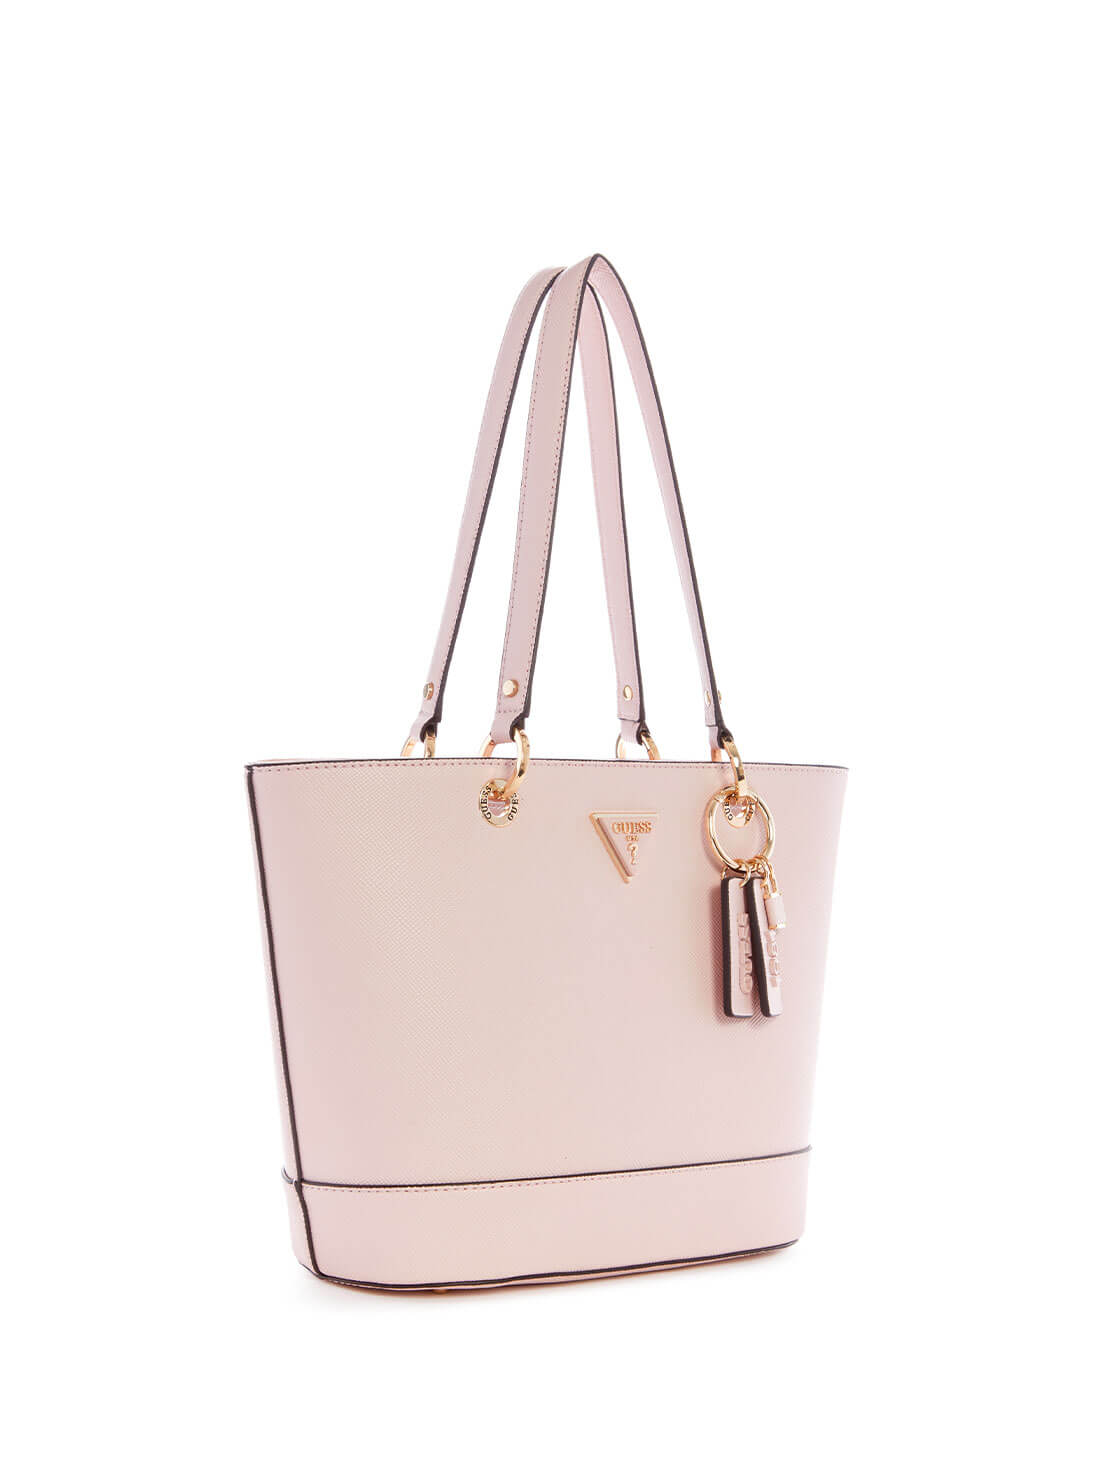 Light Pink Noelle Small Elite Tote Bag | GUESS Women's Handbags | side view